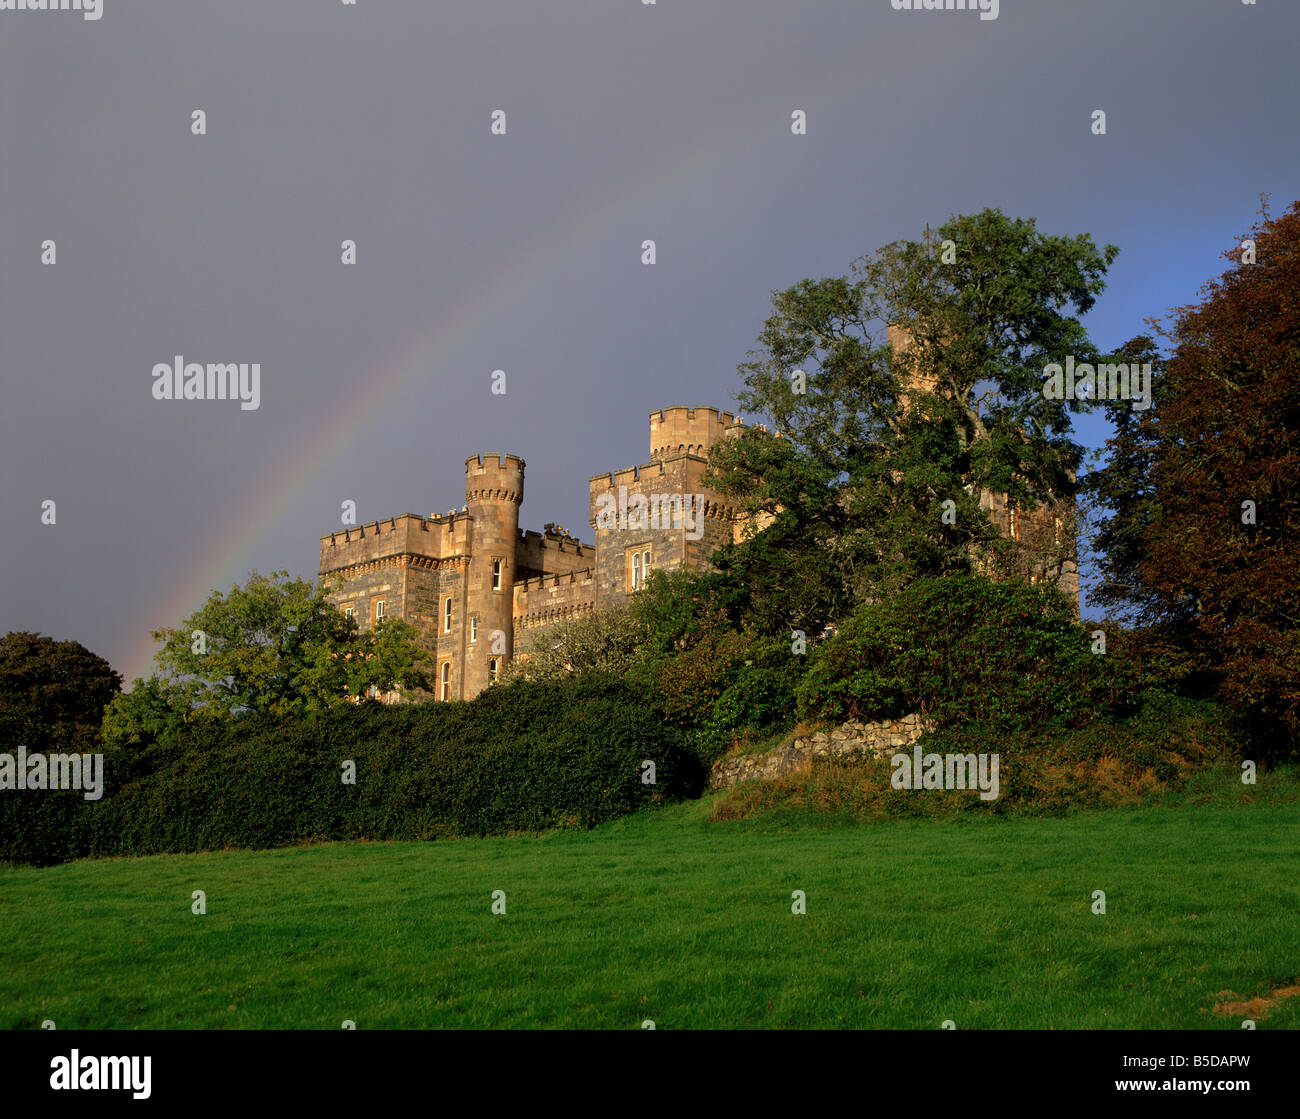 Lews Castle (Stornoway Casle) dating from the 19th century and rainbow, Stornoway, Lewis, Outer Hebrides, Scotland, Europe Stock Photo